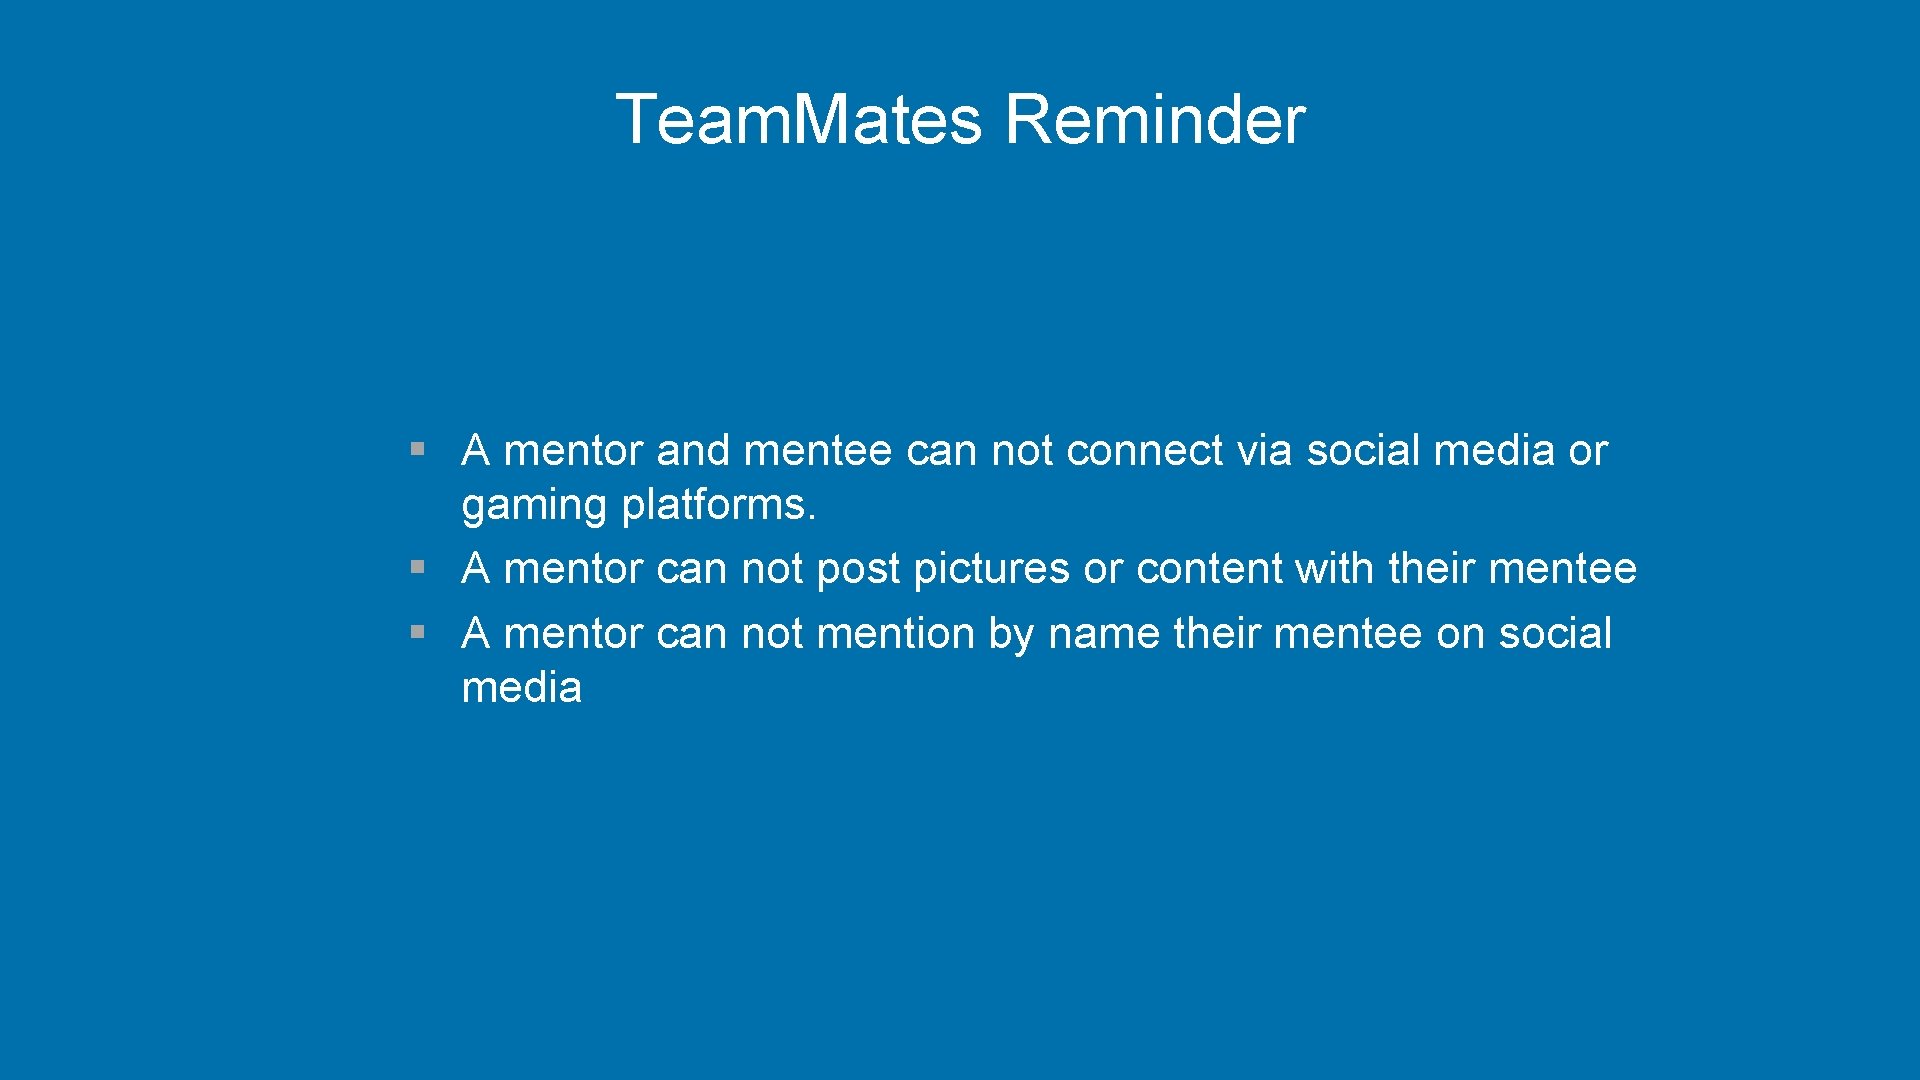 Team. Mates Reminder § A mentor and mentee can not connect via social media